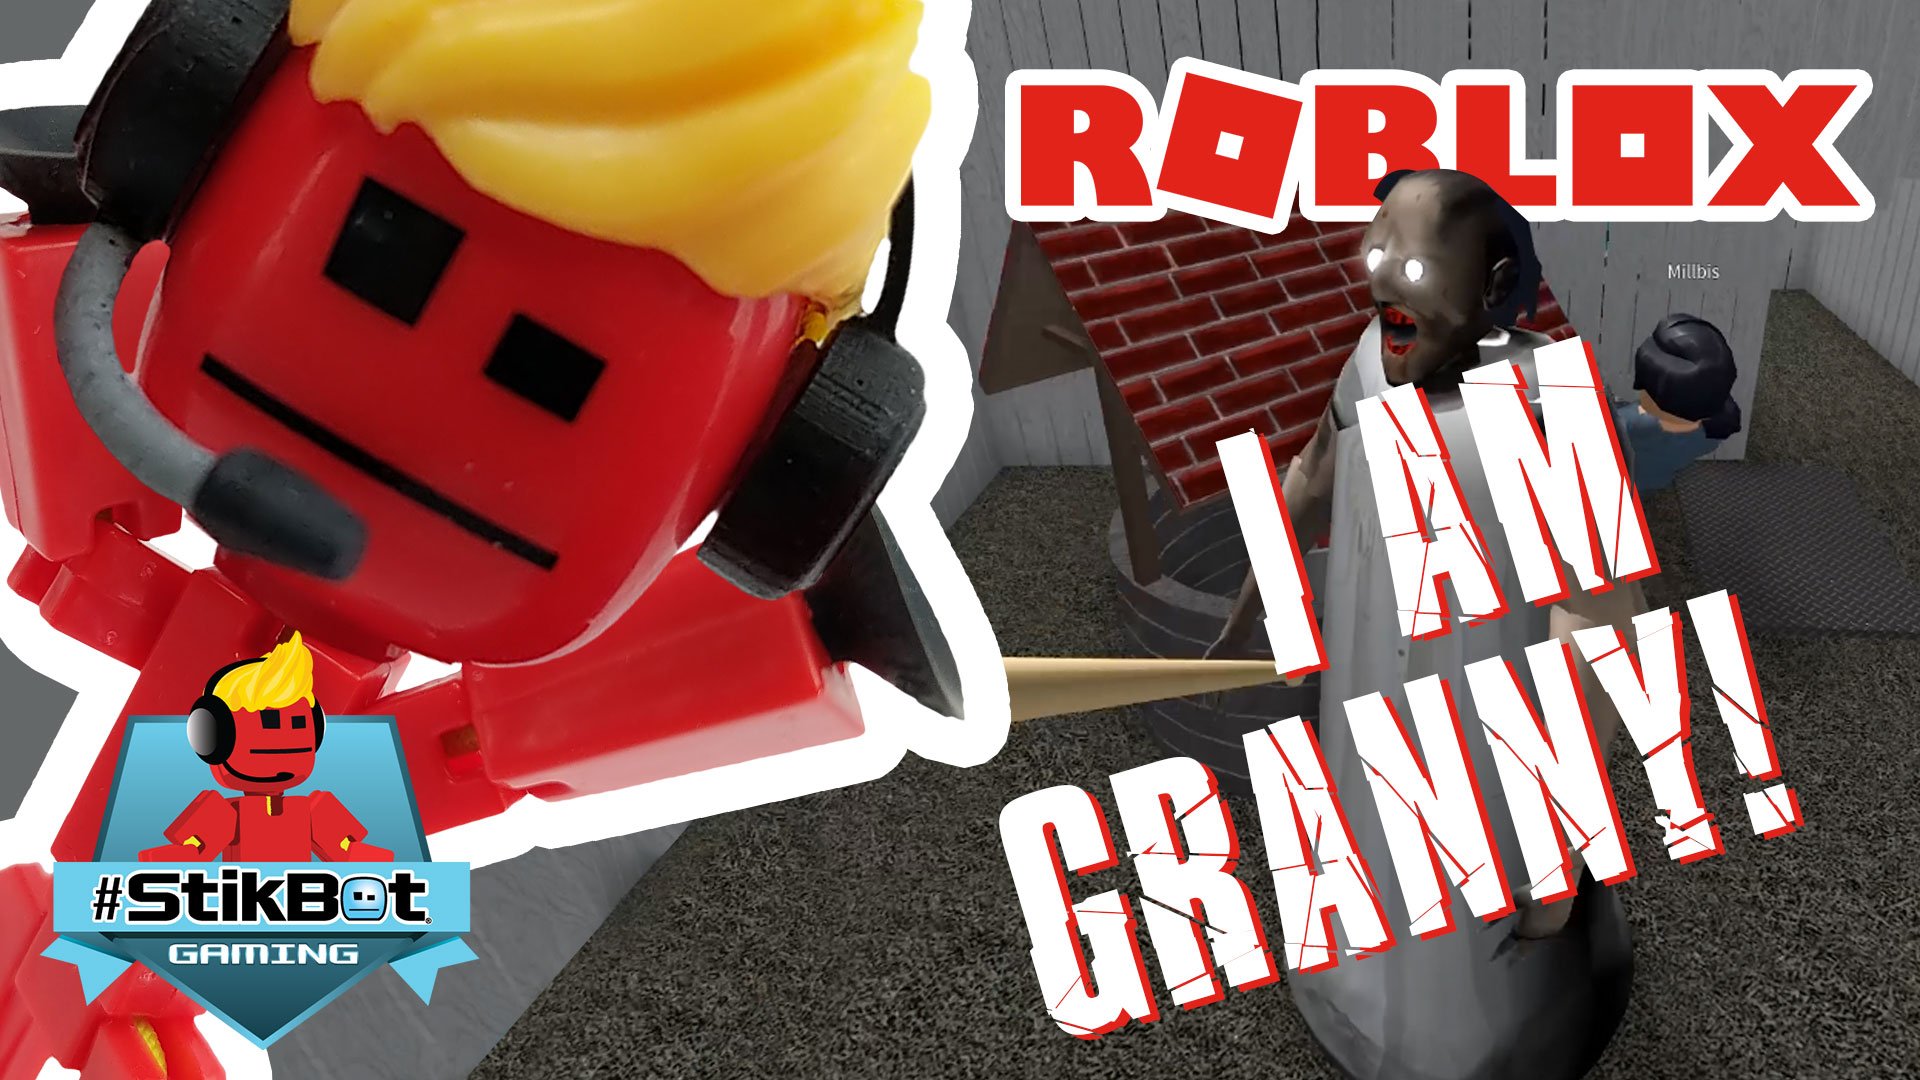 Stikbot On Twitter Due To Popular Request I Ll Be Playing Roblox Granny On This Edition Of Stikbot Gaming Https T Co Wnxjwlalxc Stikbot Roblox Stikbotgaming Robloxgranny Https T Co 4pcadkzolf - stikbot plays roblox